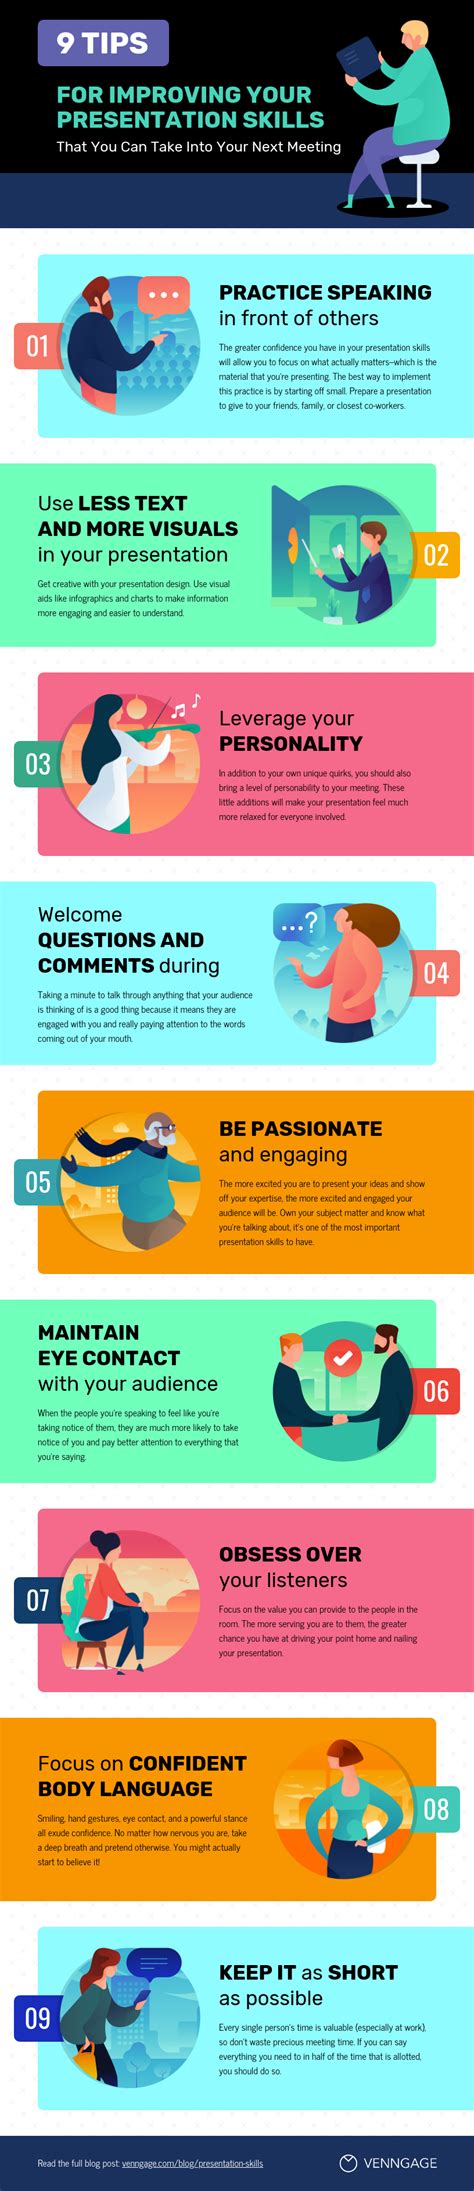 Presentation Skills Ultimate Guide How To Give A Good Presentation